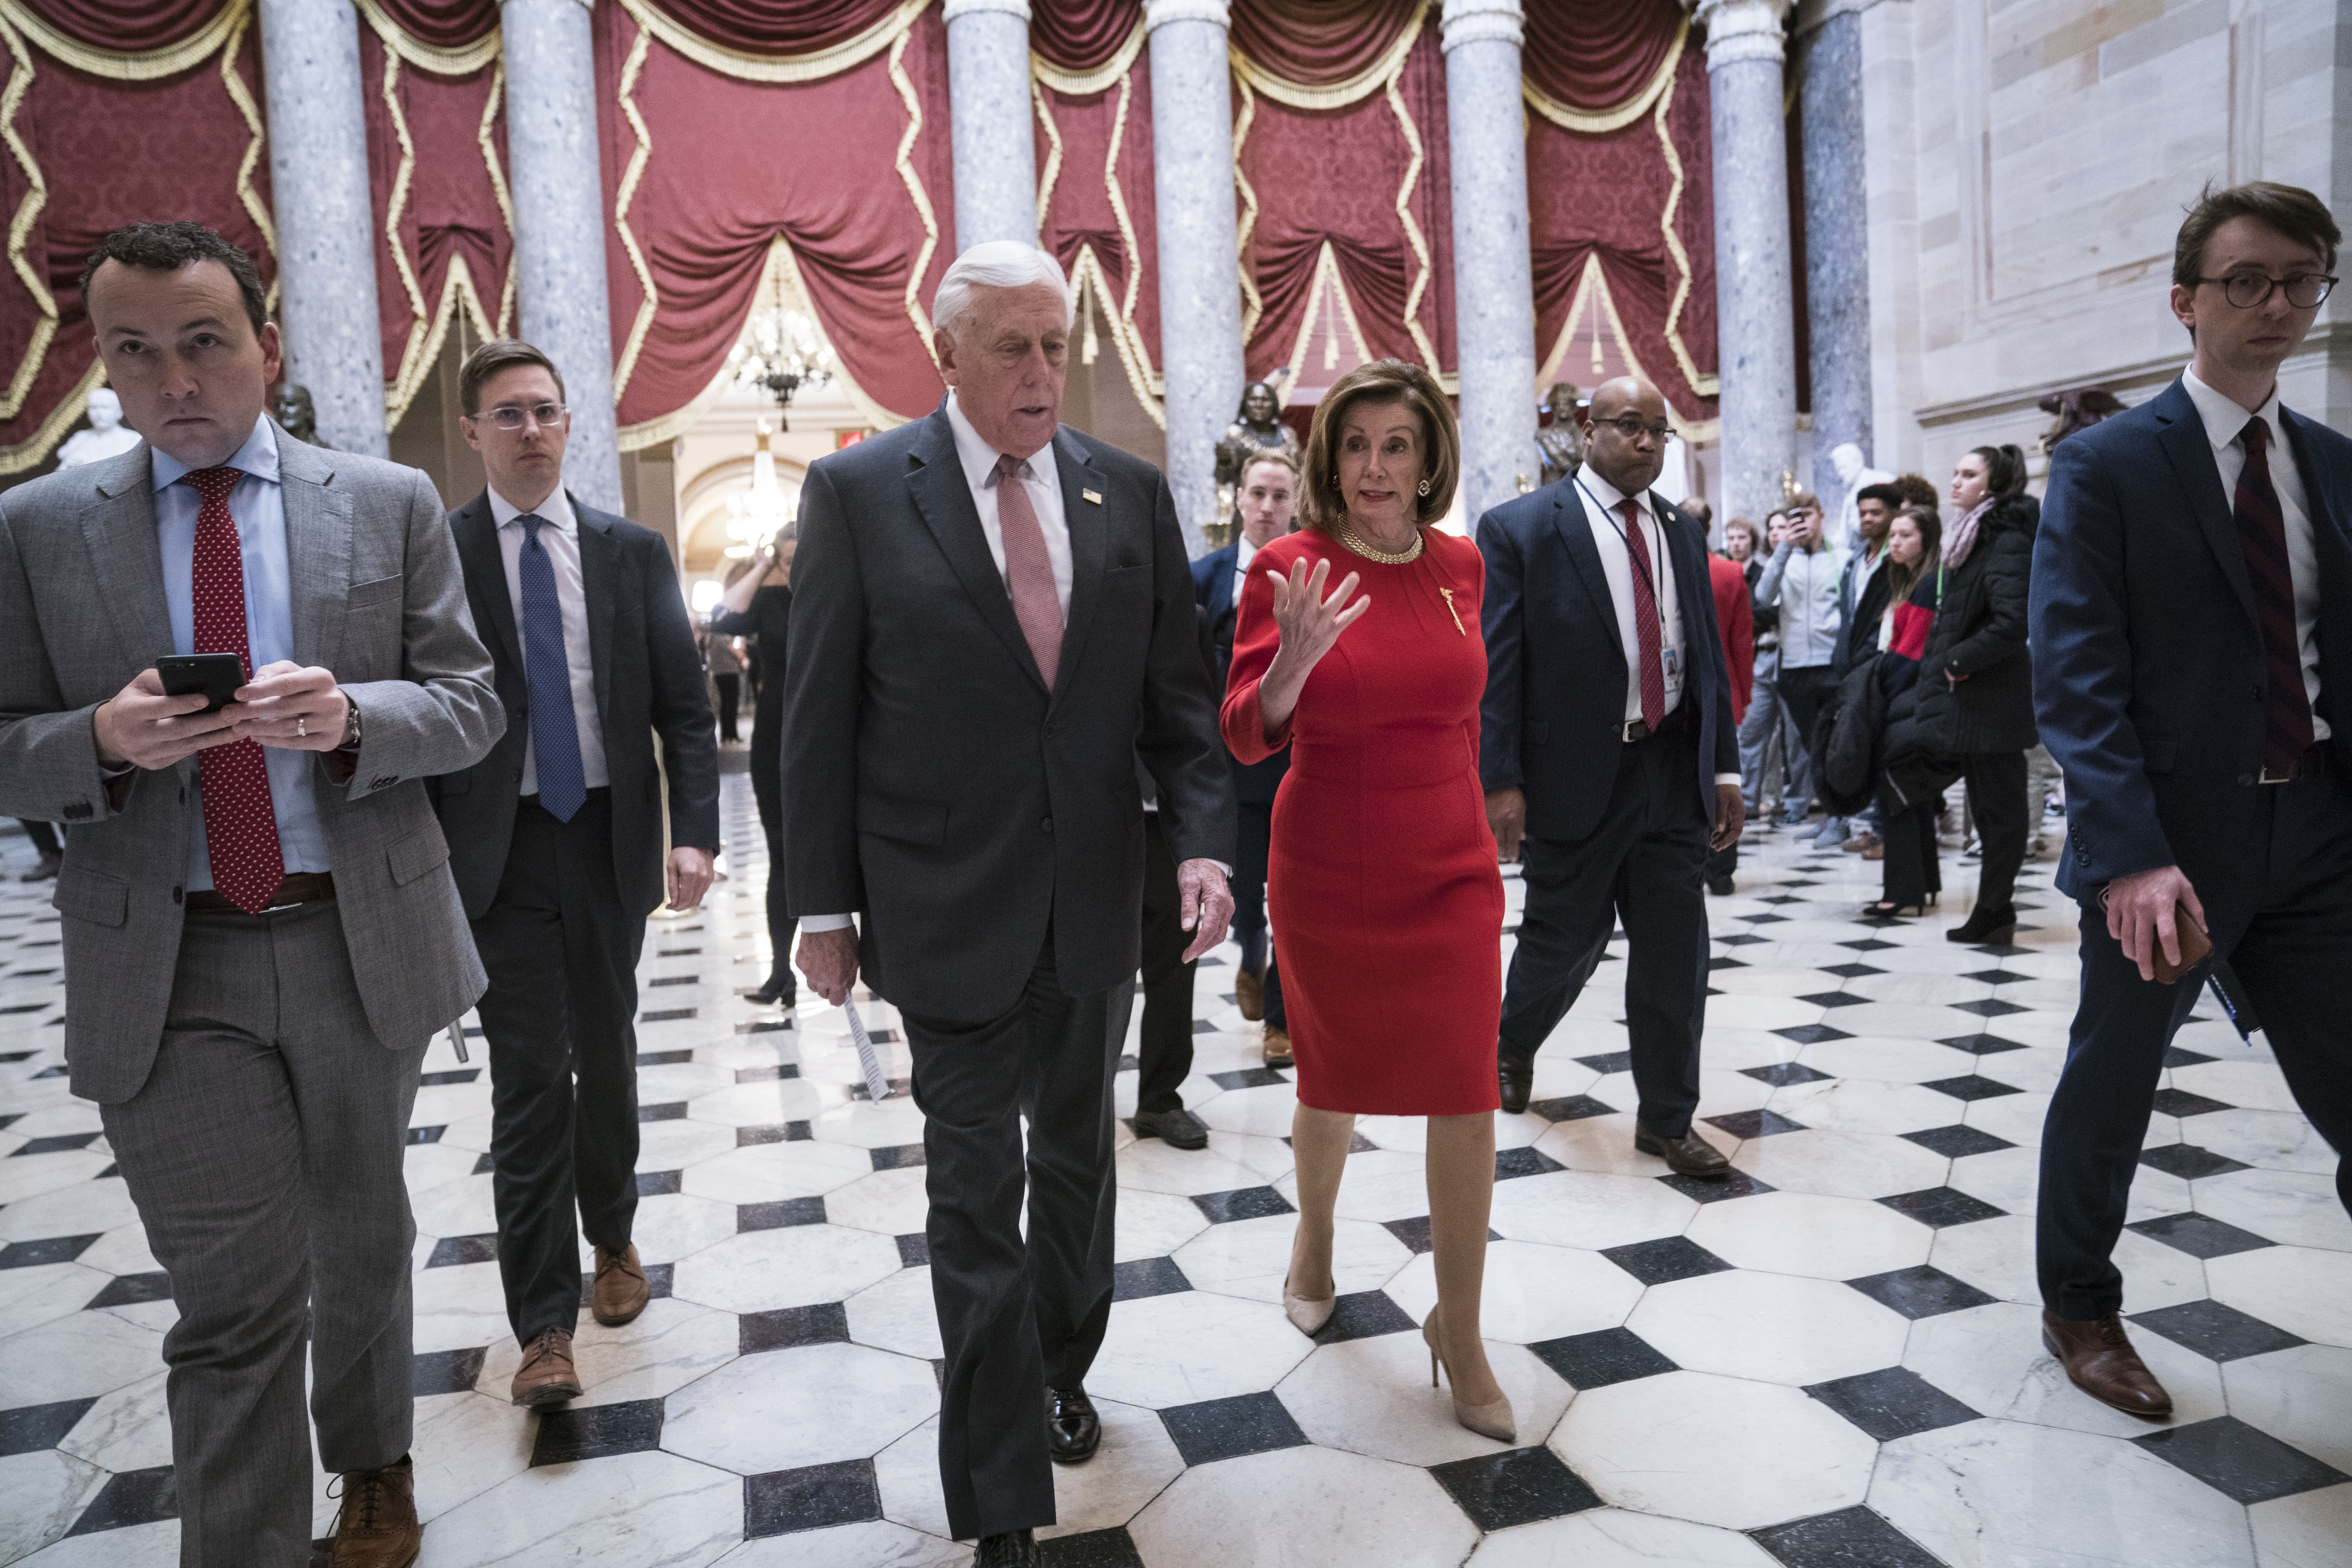 House Majority Leader Rep. Steny Hoyer (D-MD) and House Speaker Nancy Pelosi (D-CA) walk from the House floor where members debate the United States-Mexico-Canada Agreement (USMCA) to the speaker's office in the U.S. Capitol on December 19, 2019. (Sarah Silbiger/Getty Images)